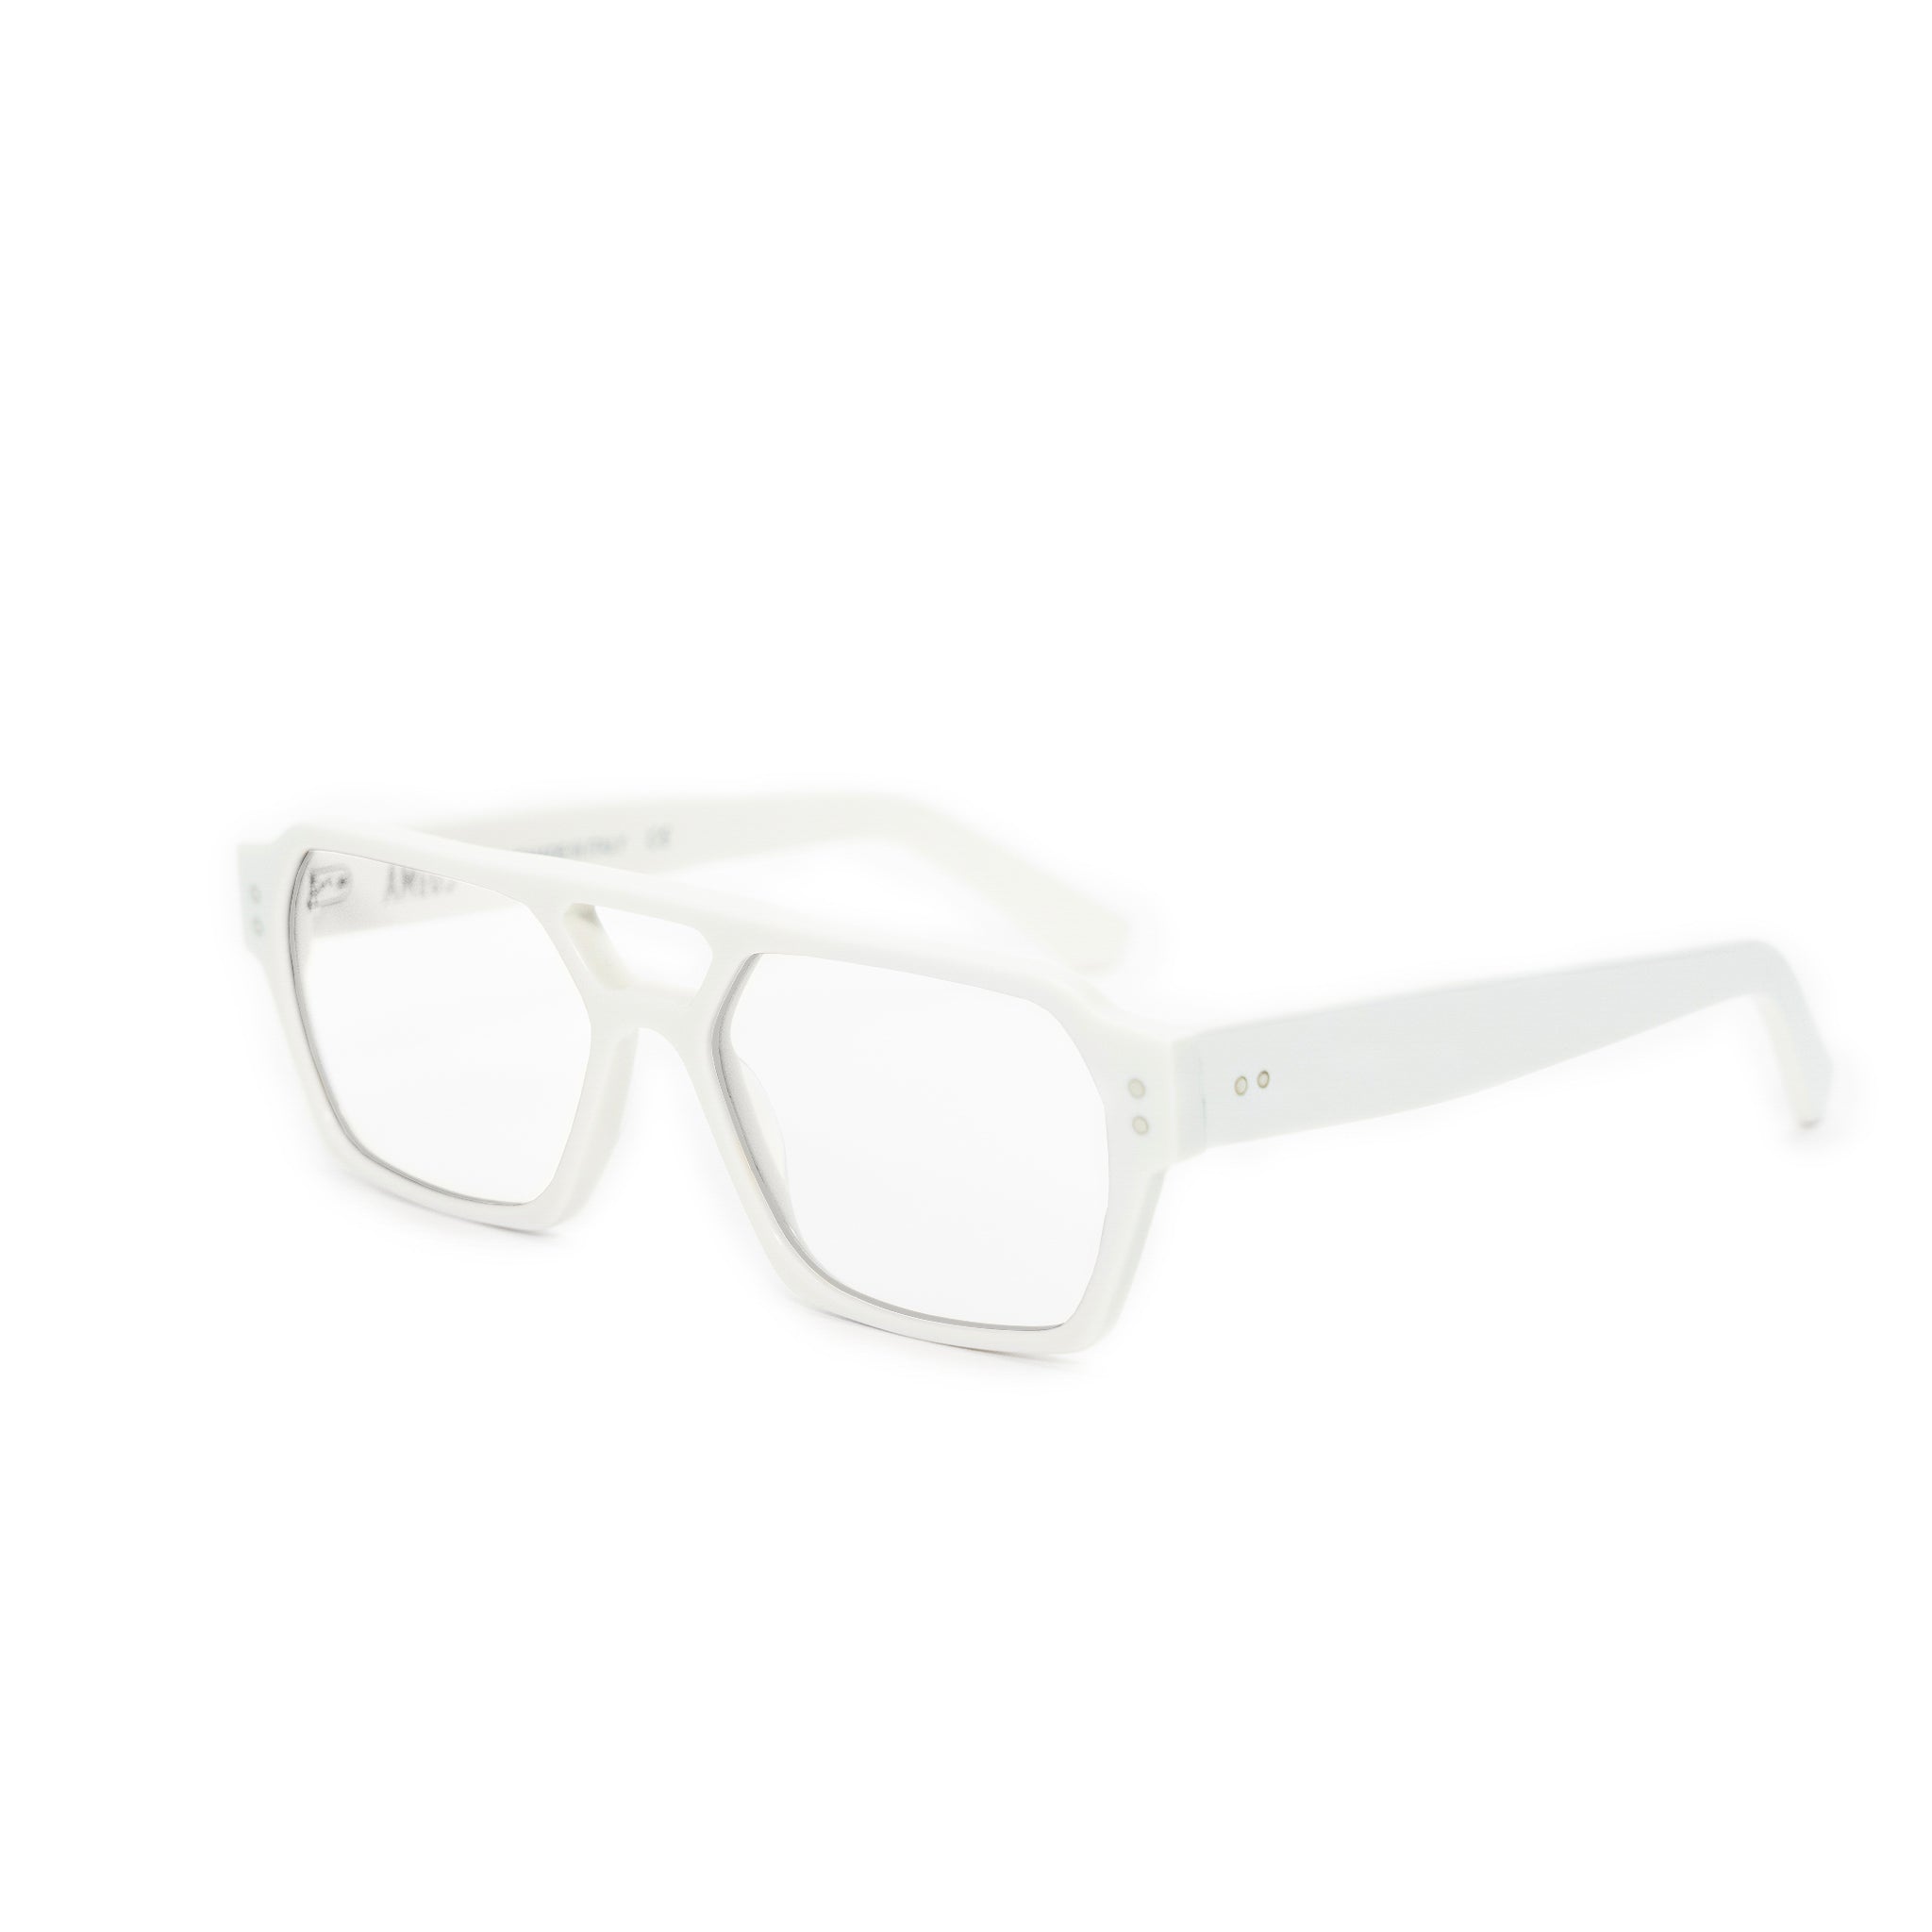 Ego optical glasses in white from Ameos Eyewear.